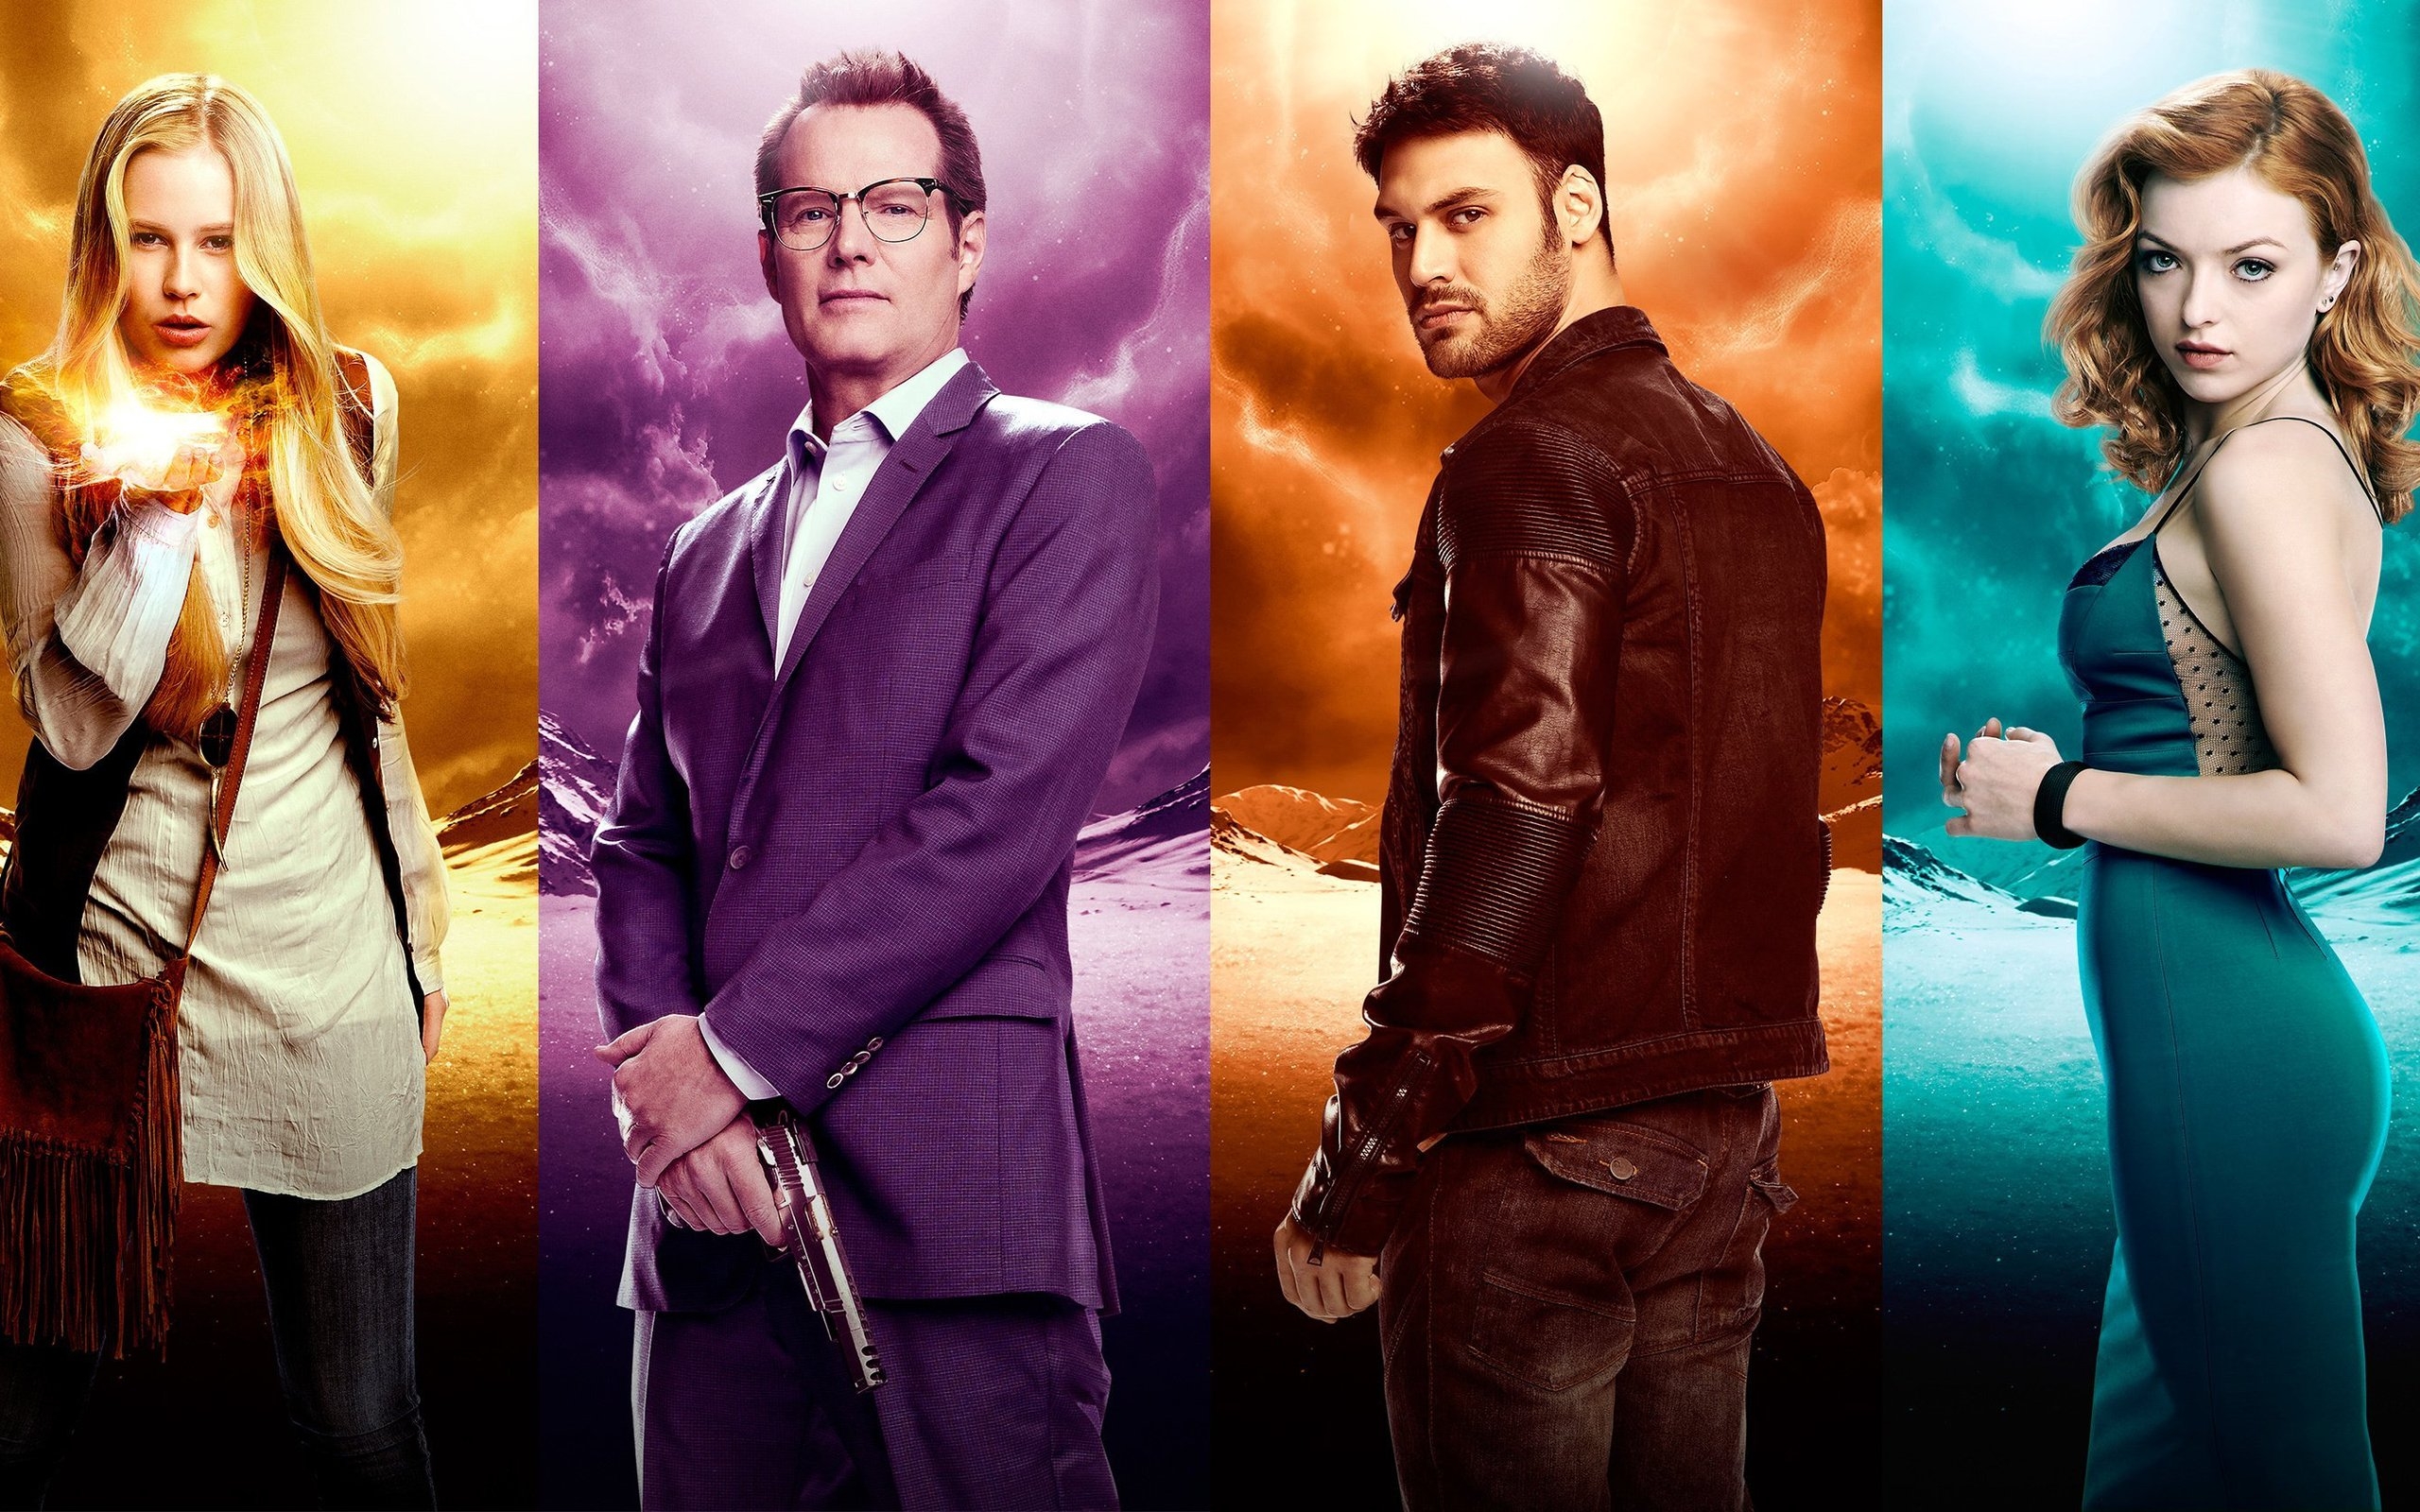 Heroes Reborn Cast for 2560 x 1600 widescreen resolution